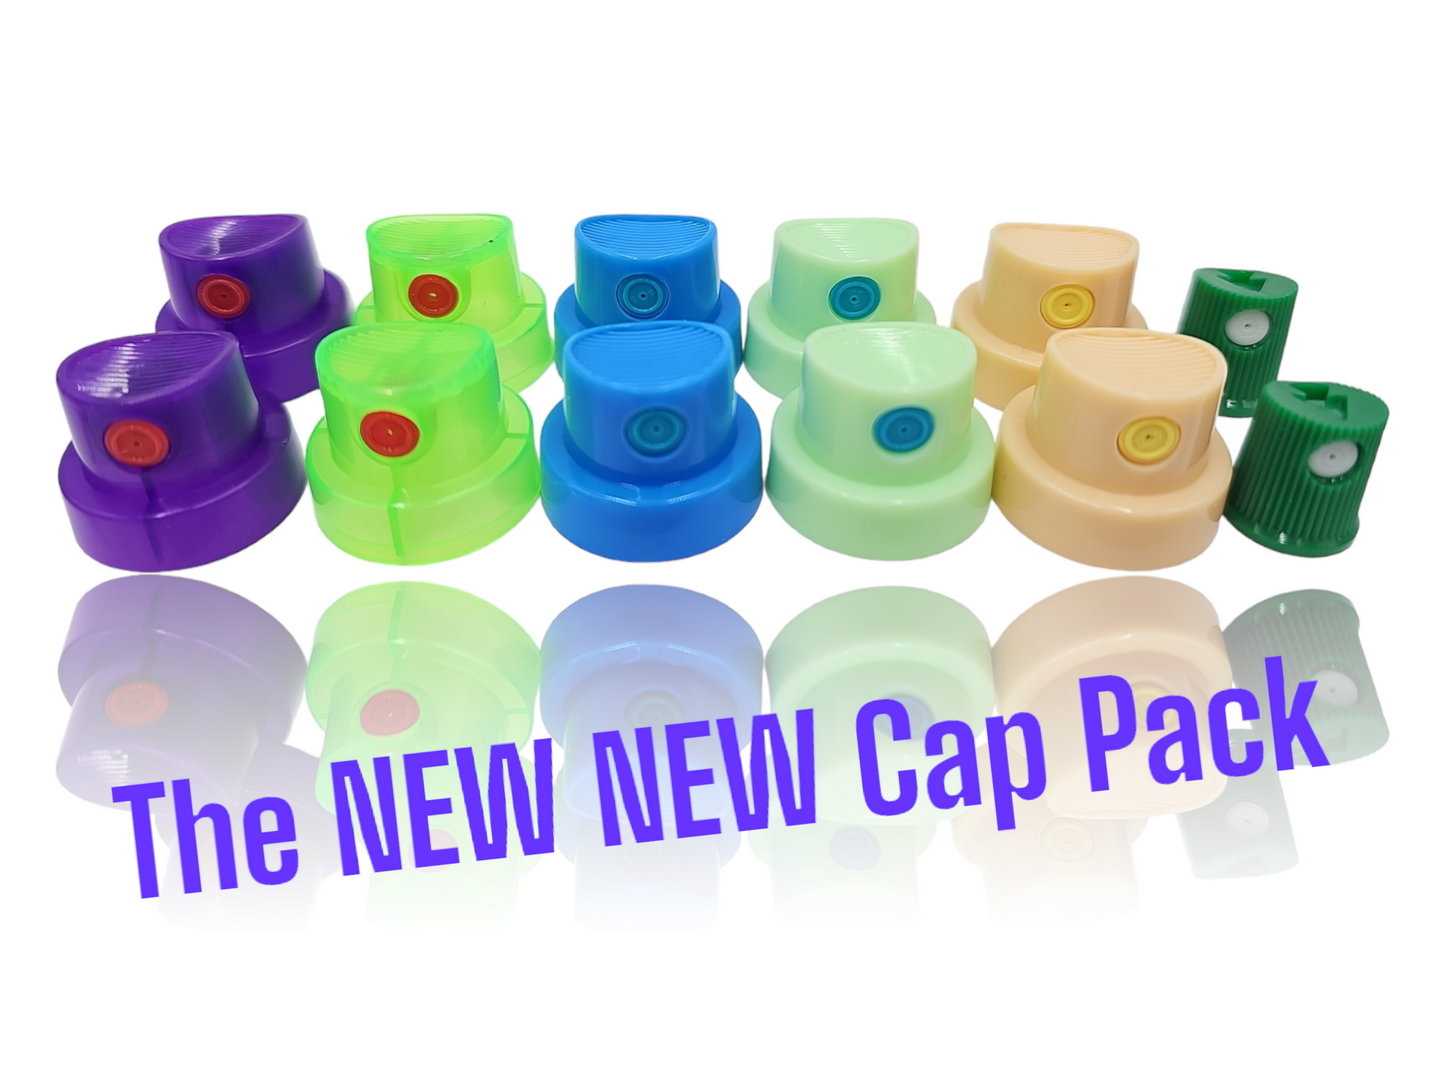 The NEW NEW Cap Pack